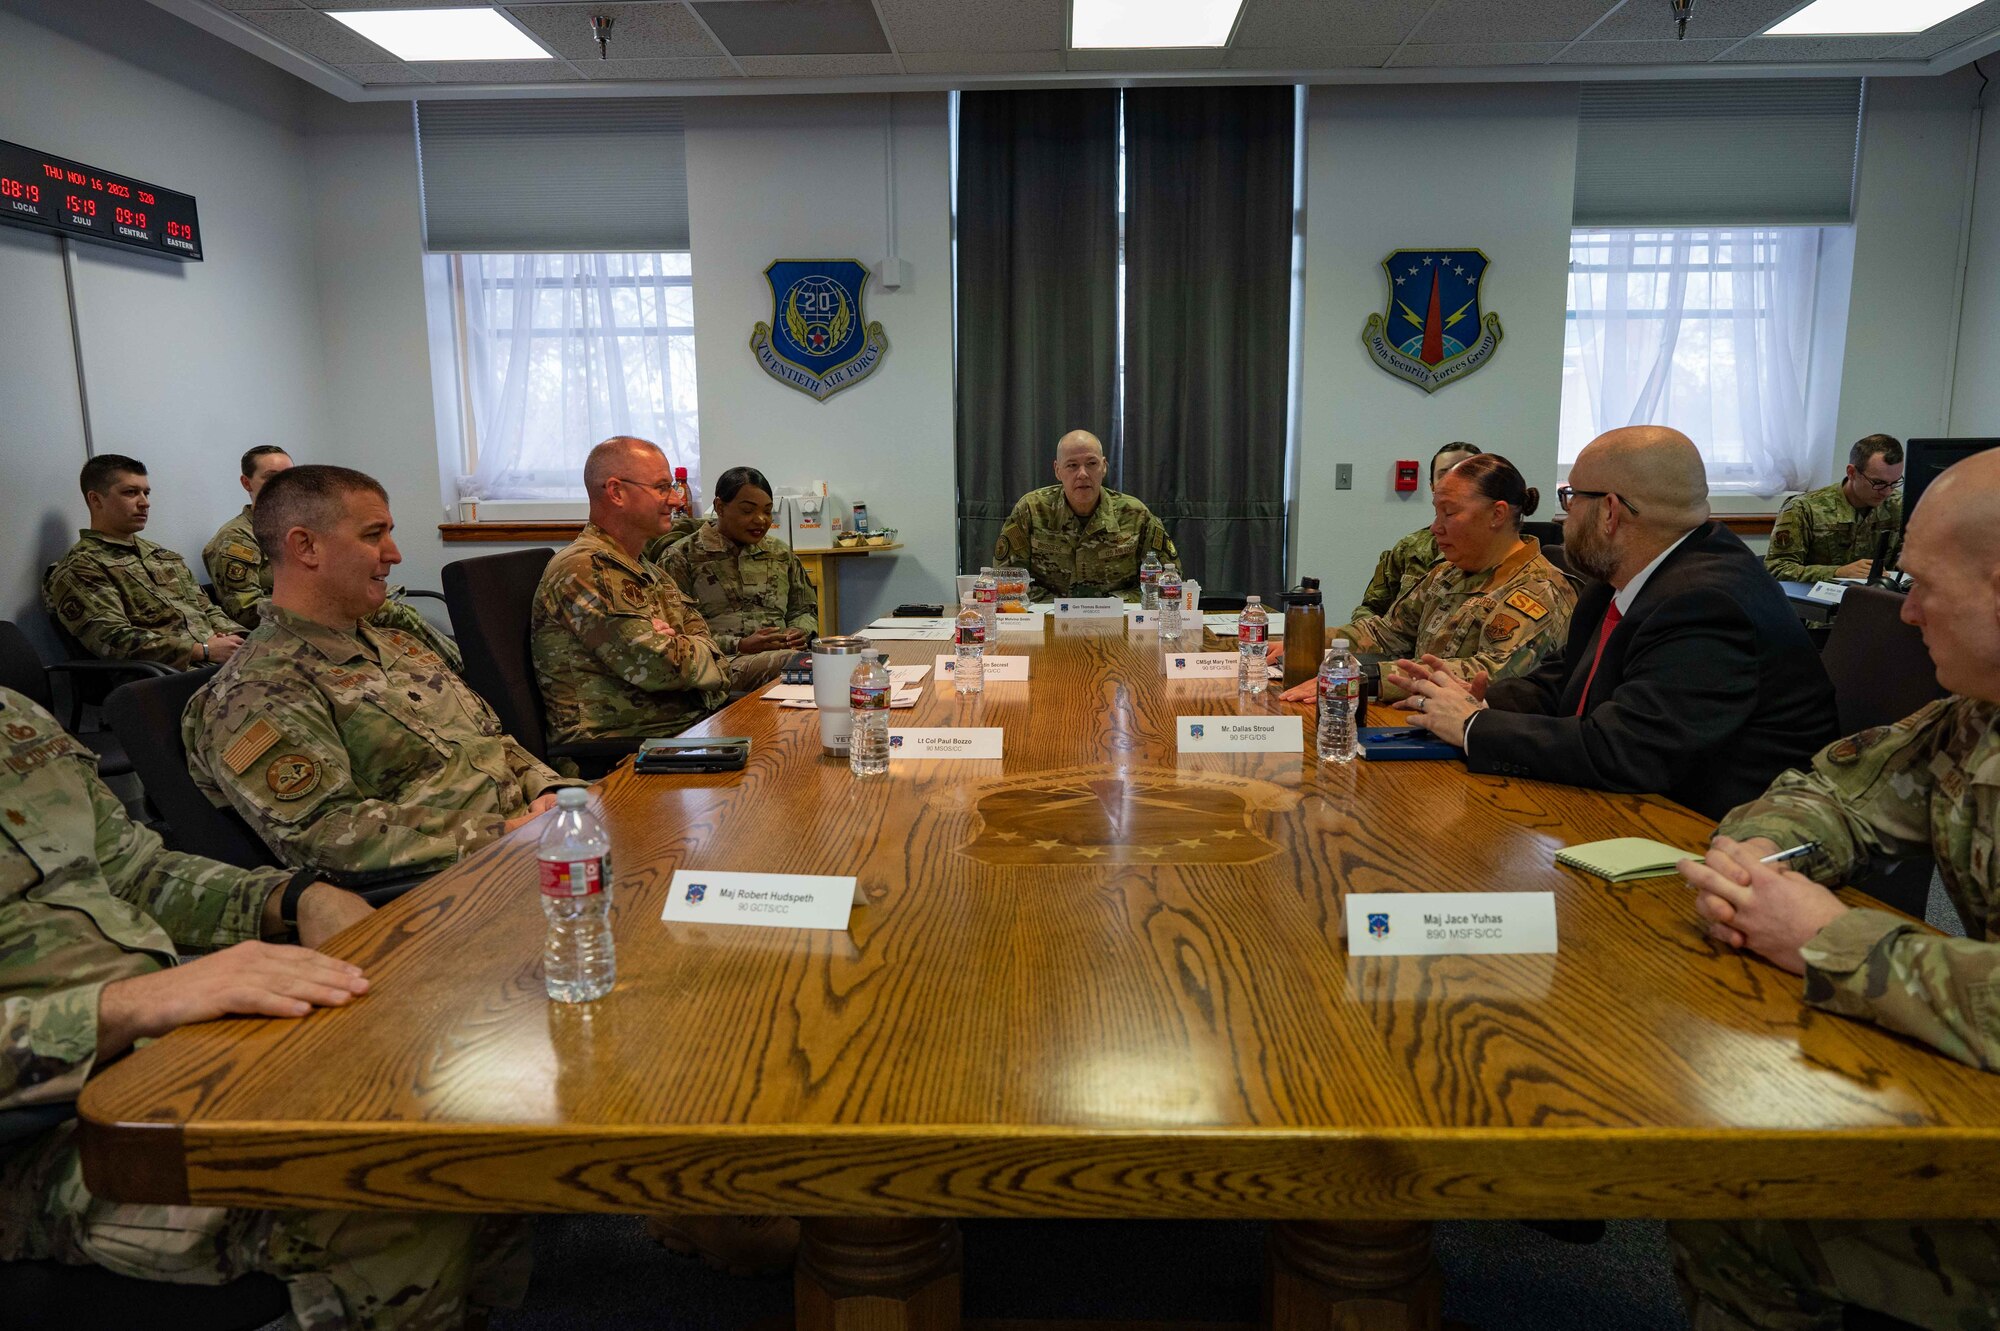 Air Force Global Strike Command leaders talk to security forces leaders.